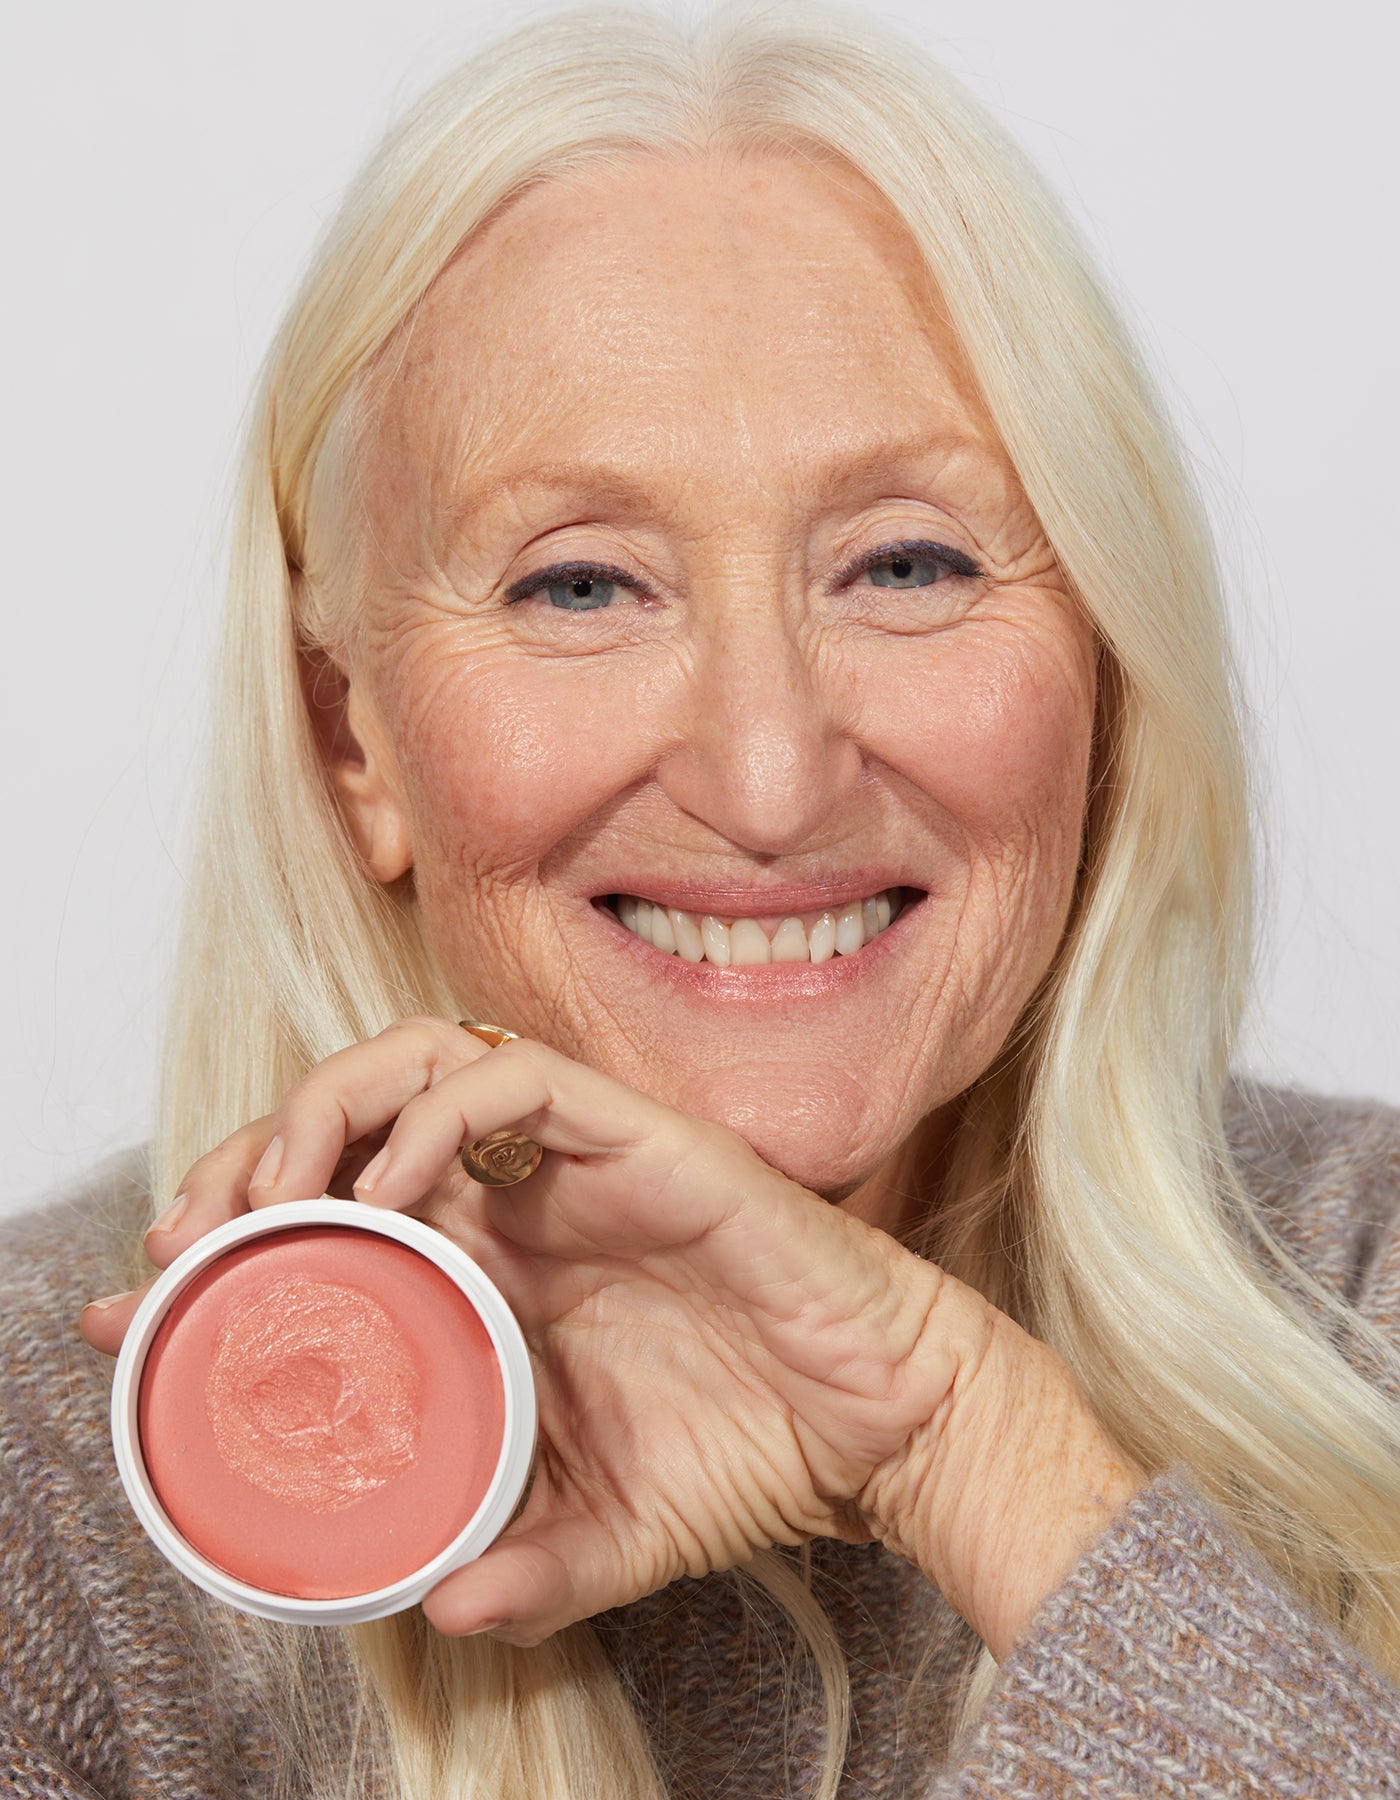 A woman holding Miracle Balm by Jones Road